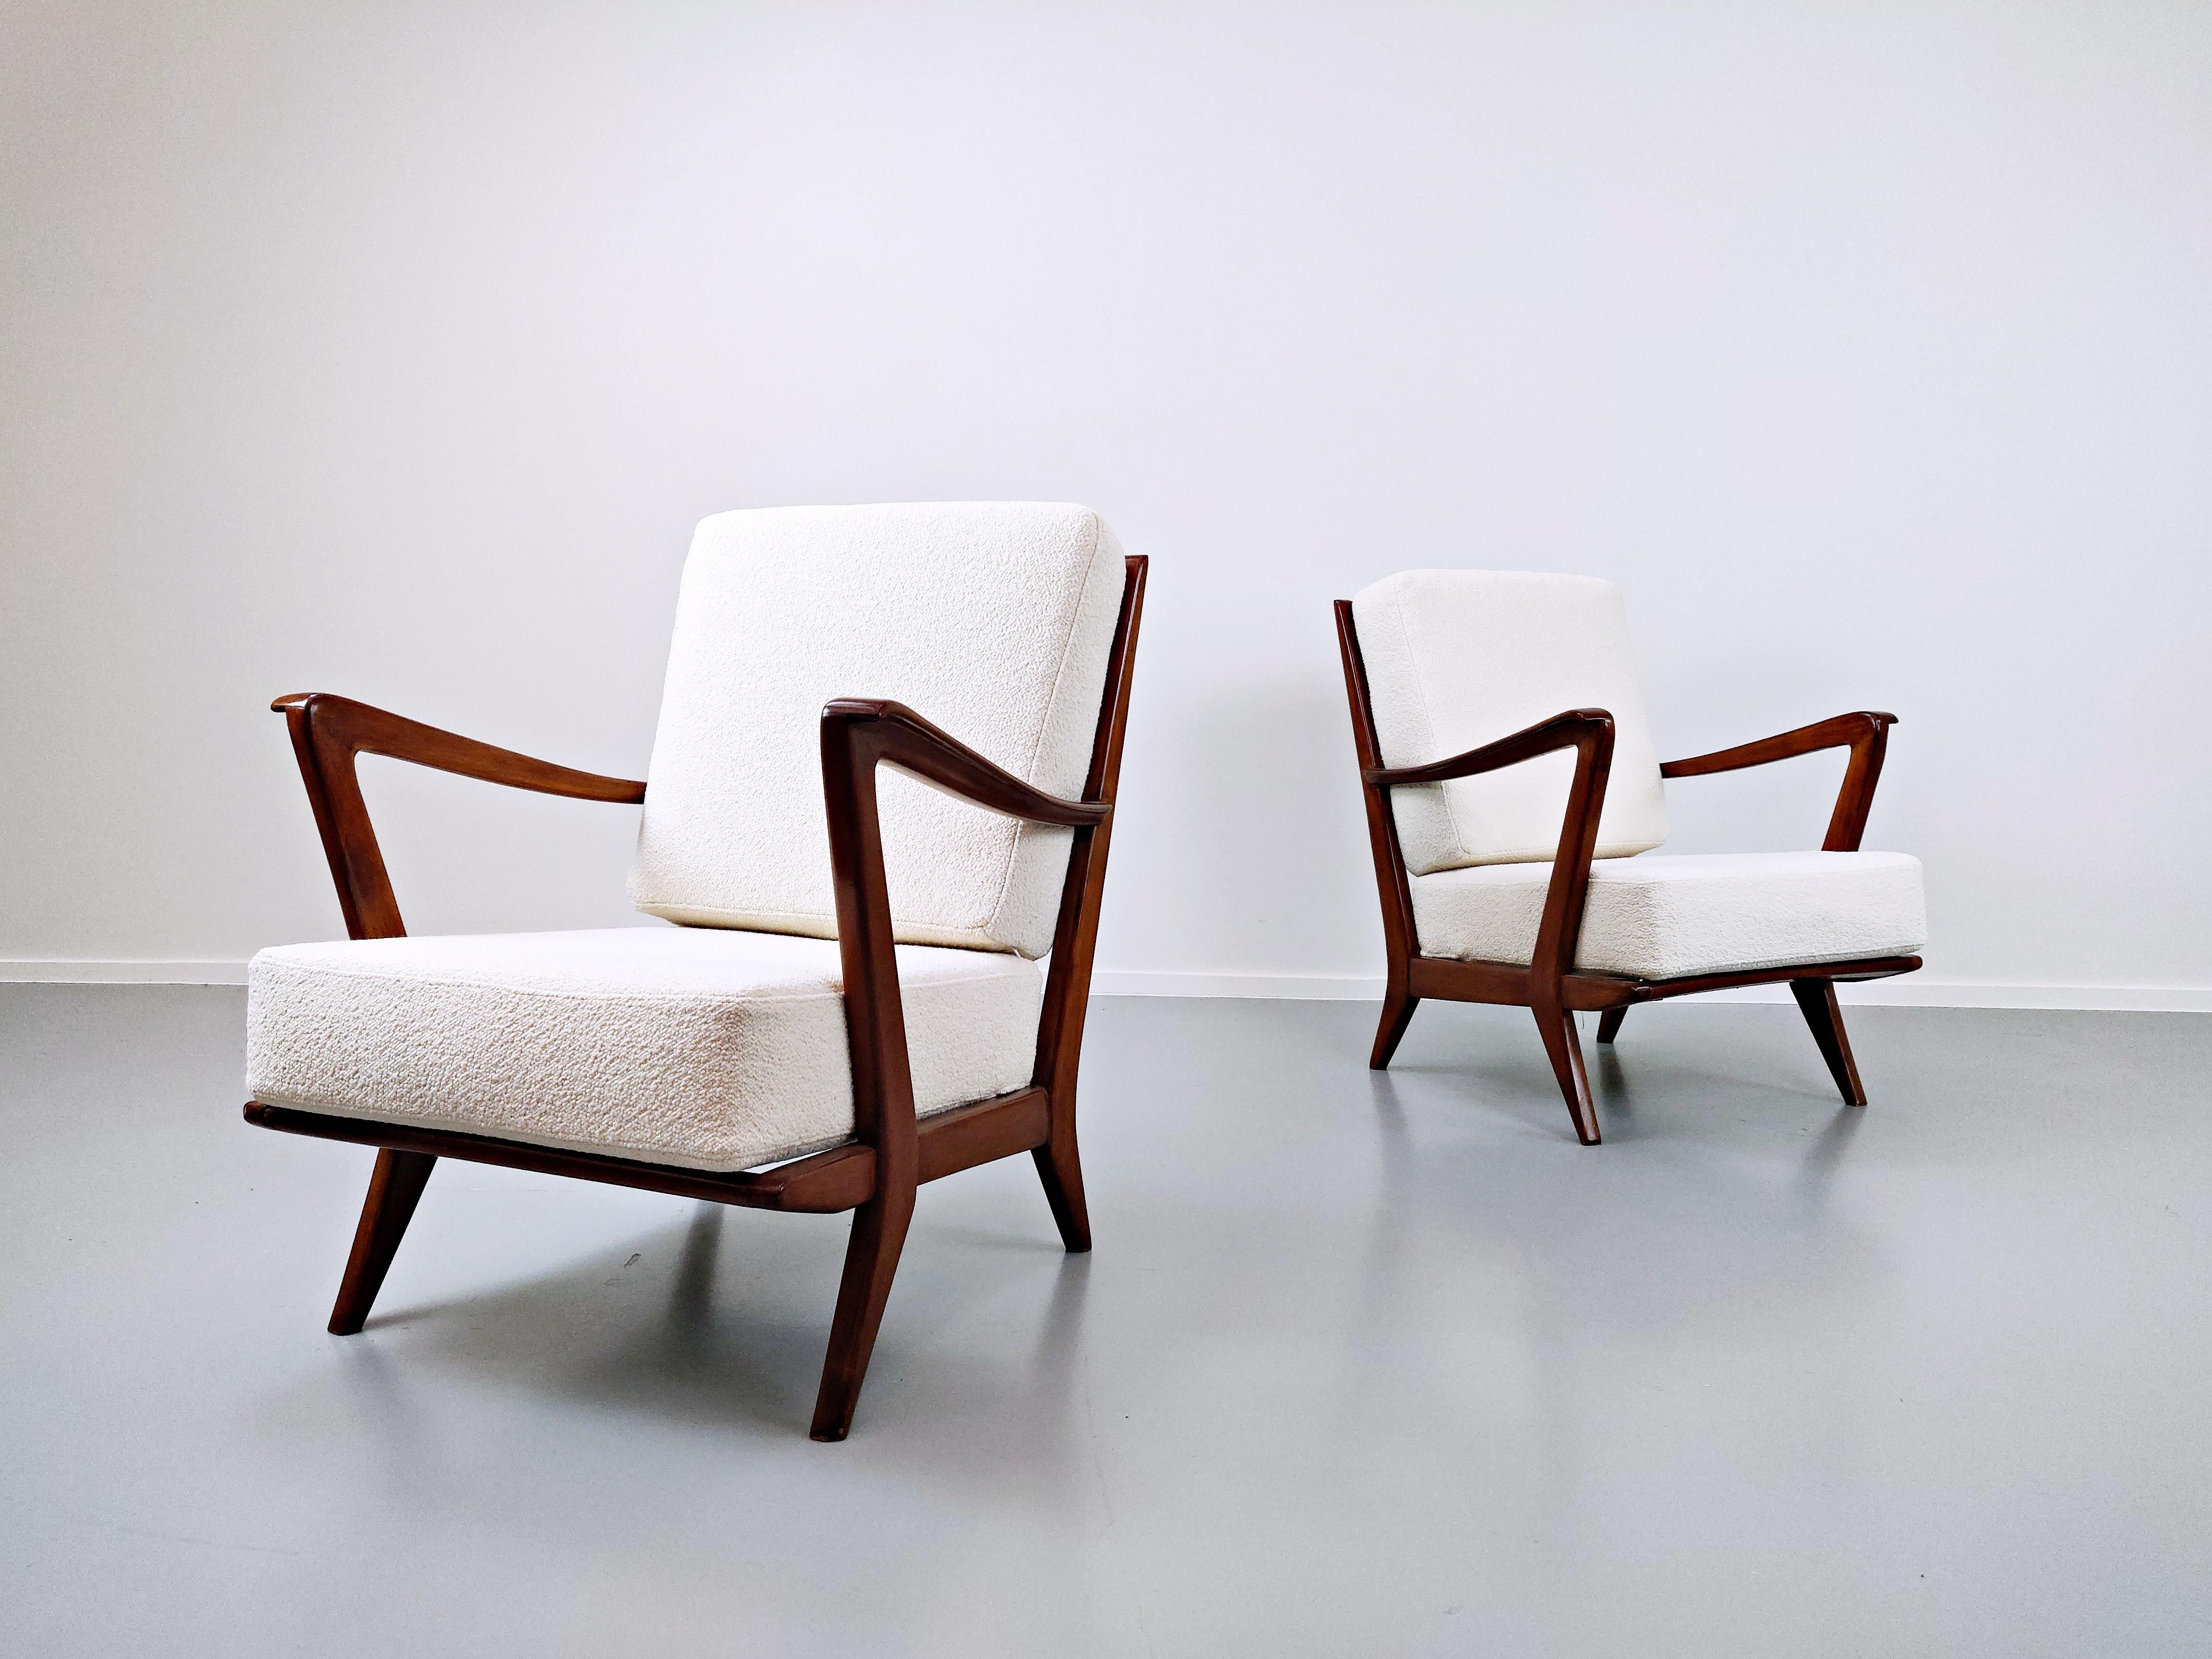 Wood Pair of Mid-Century Modern Armchairs Model 516 by Gio Ponti for Cassina, 1950s